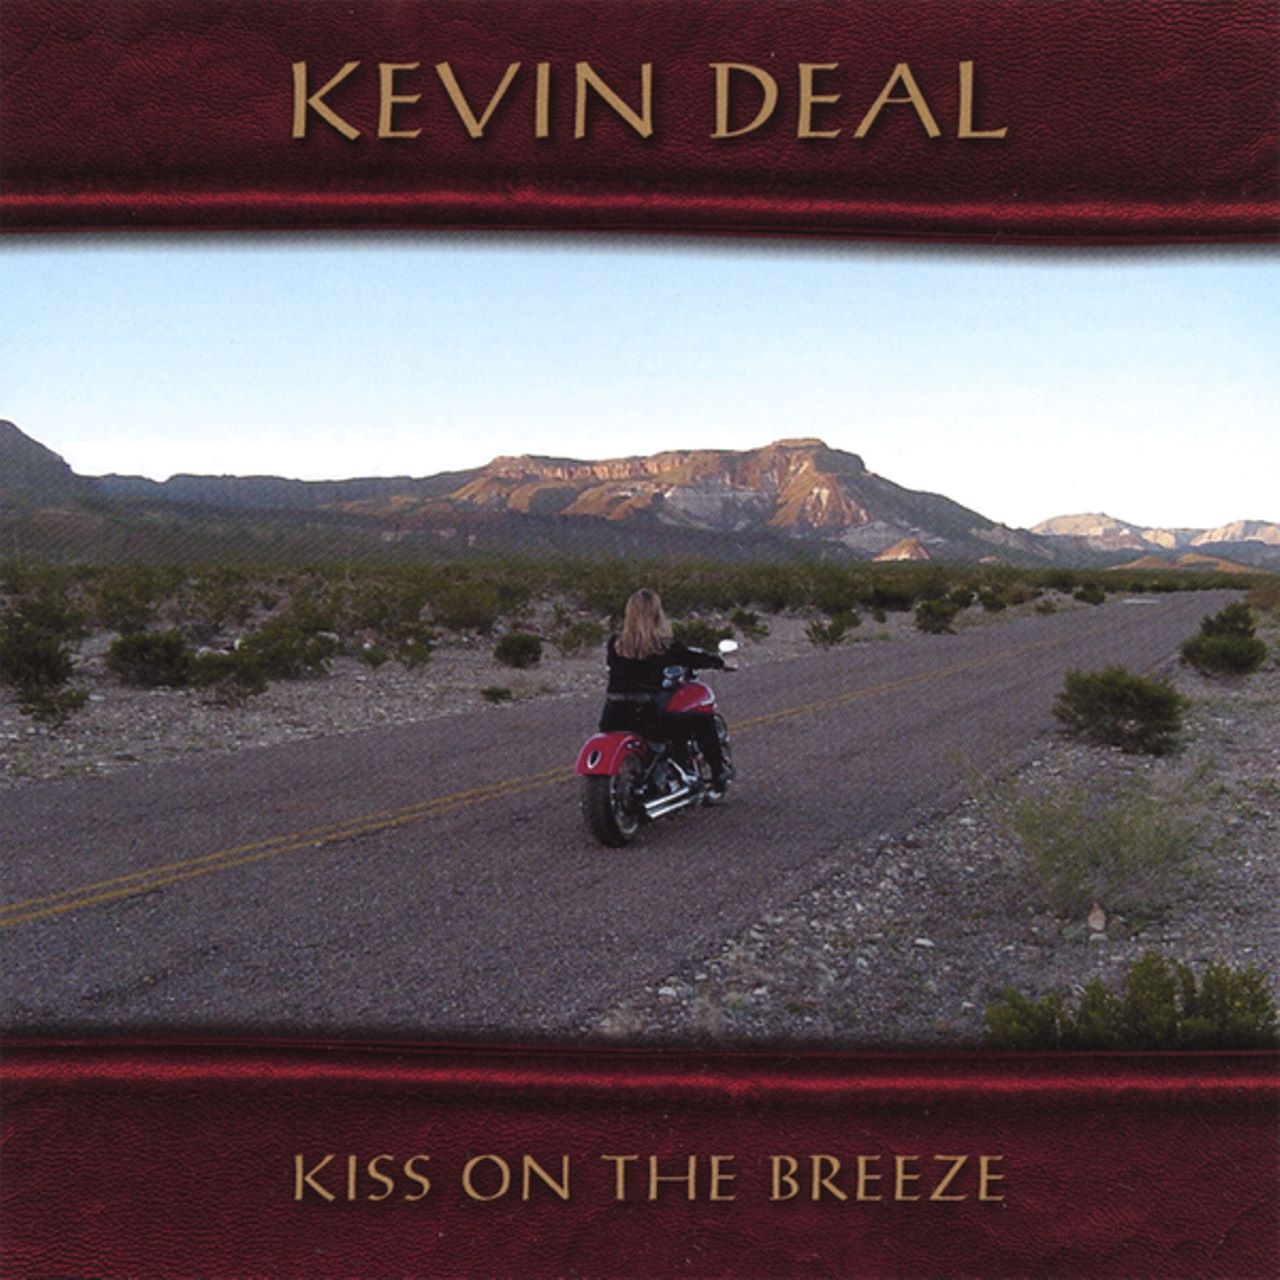 Kevin Deal - Kiss On The Breeze cover album